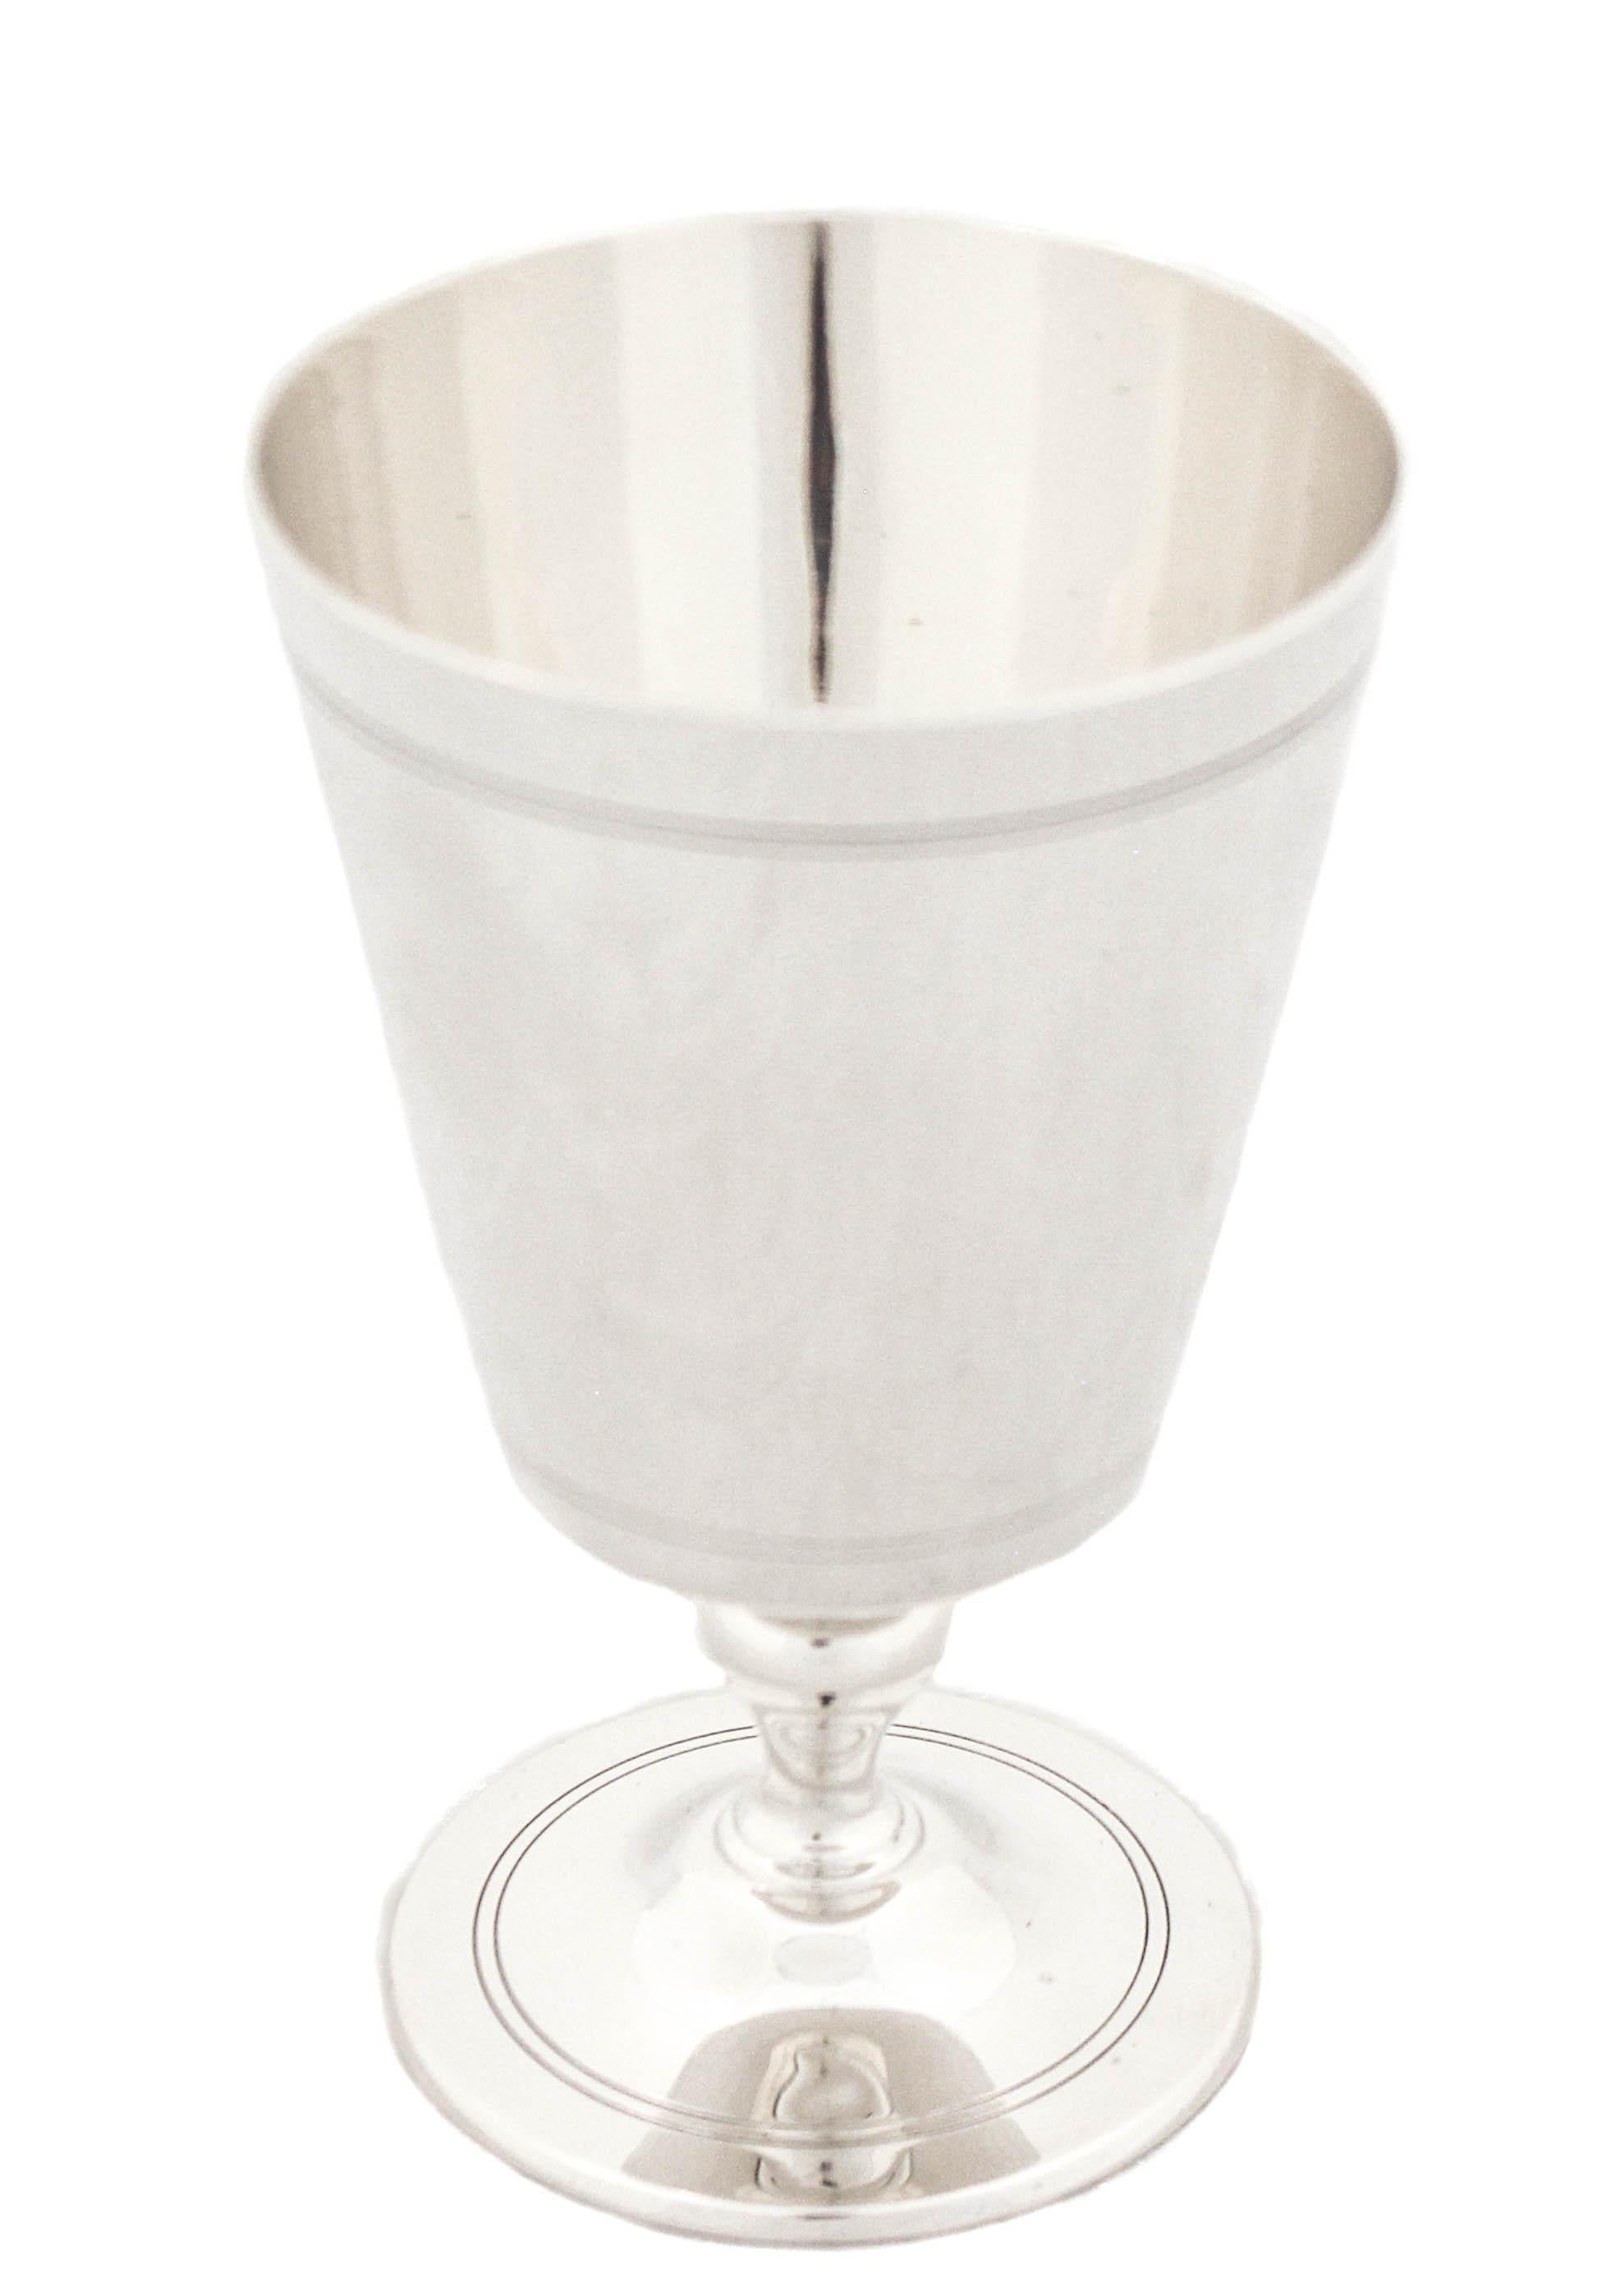 Being offered is a sterling silver goblet by the world renowned Tiffany and Company.  It has that classic Mid-Century modern look with that heavy Tiffany weight.  Straight lines and a sleek minimalist design give this piece a sophisticated and